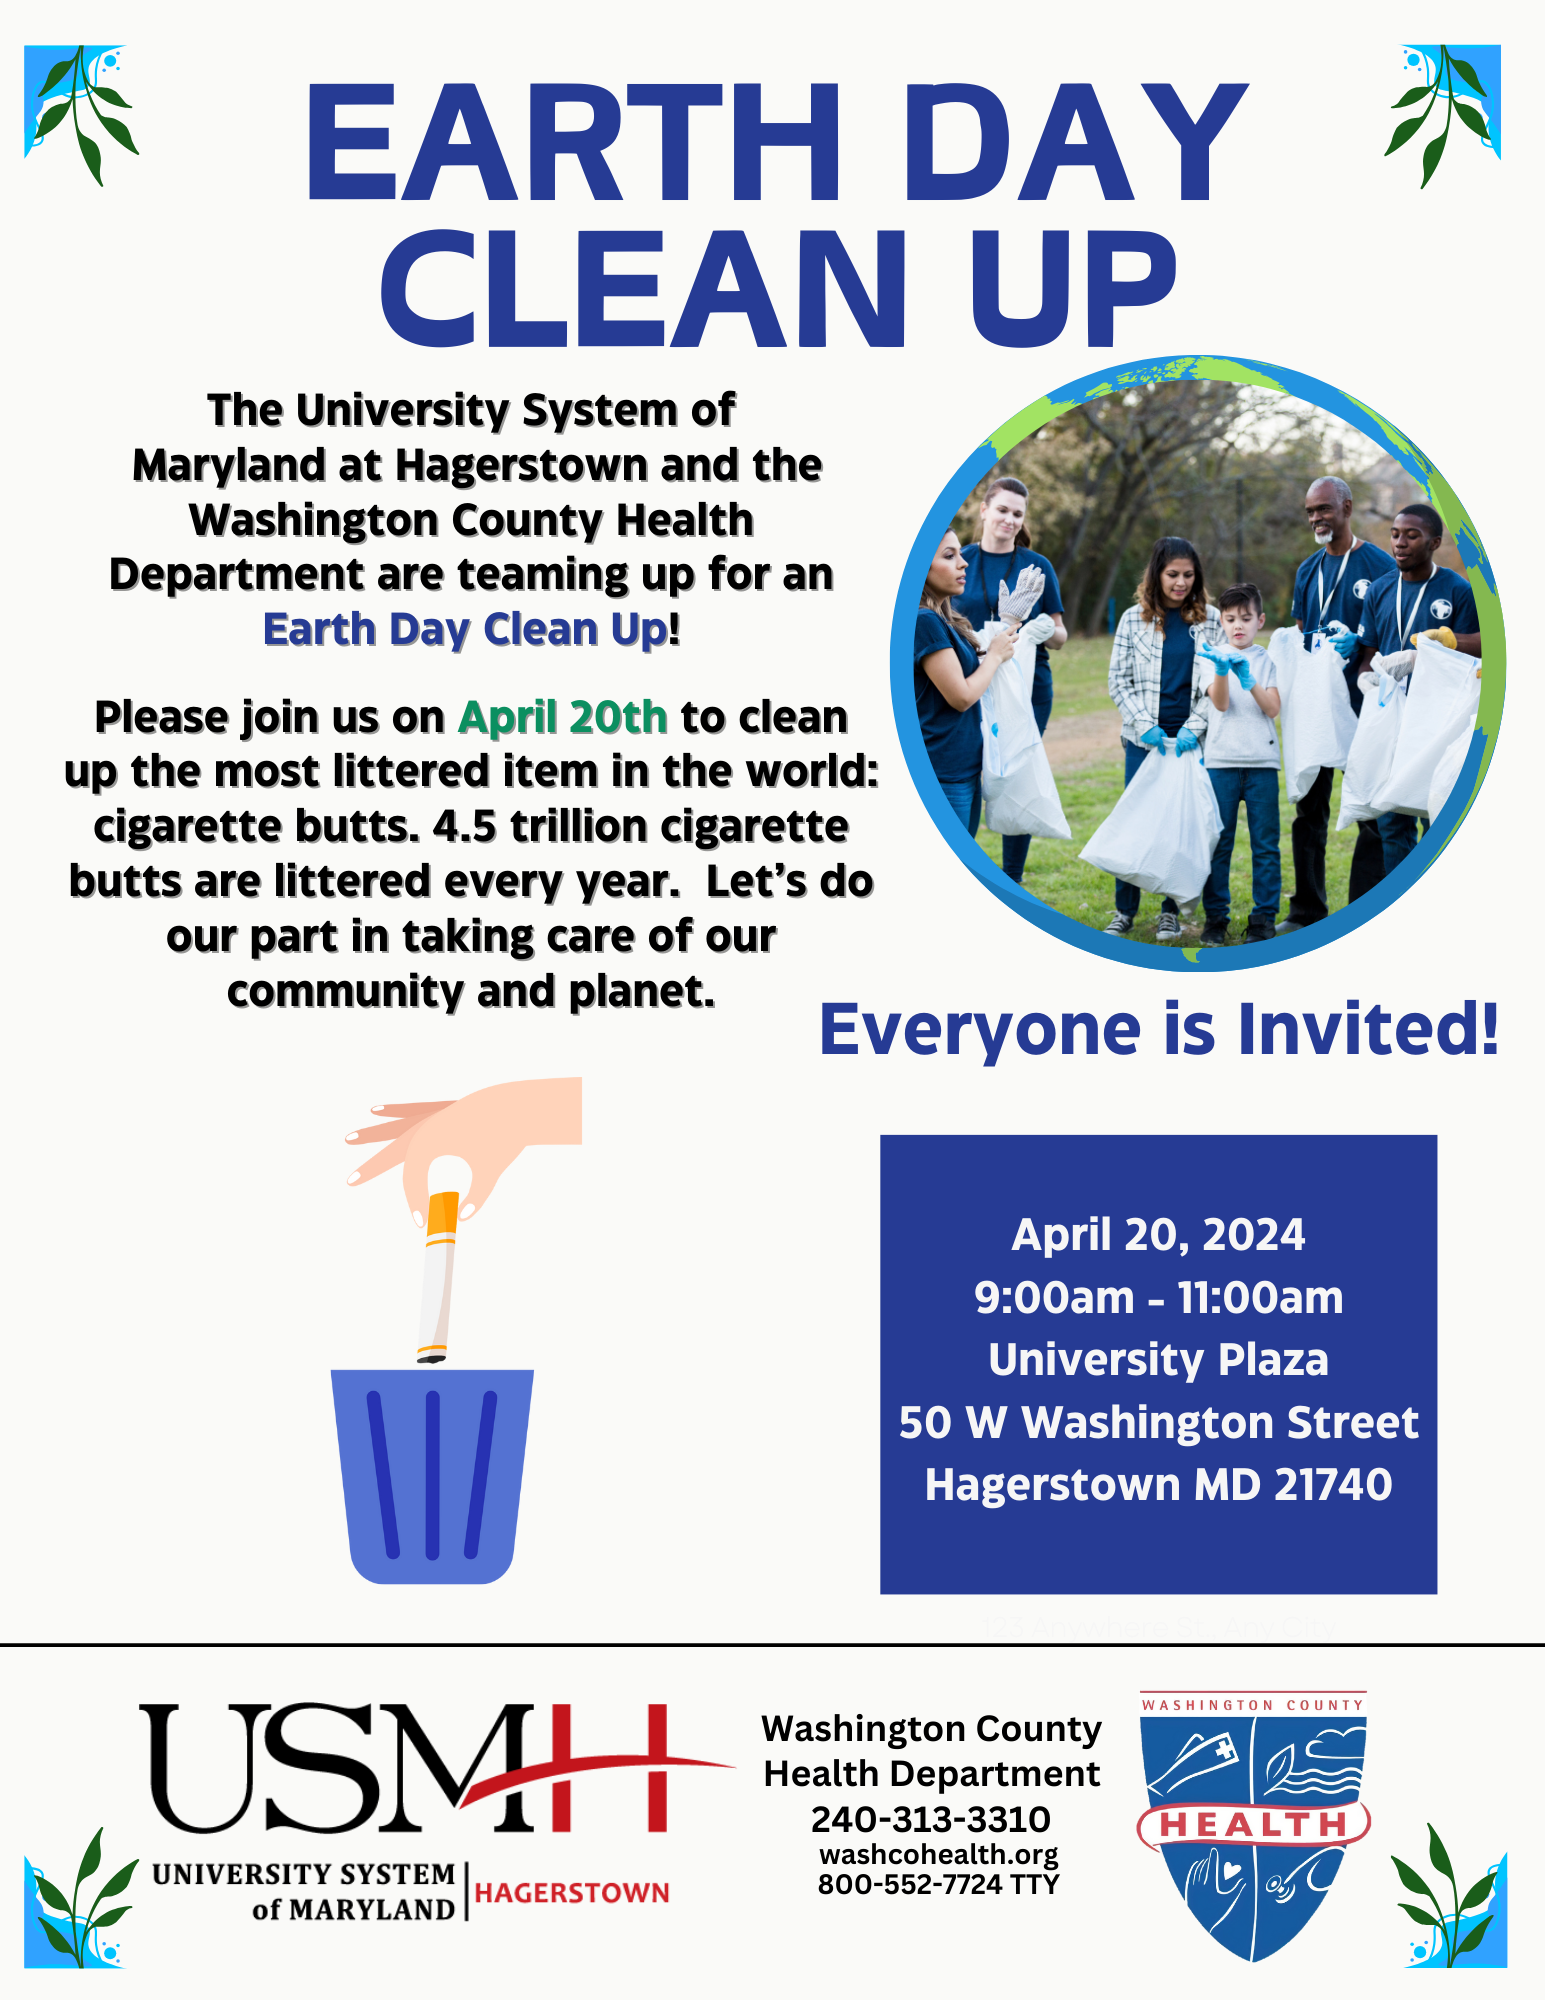 Image: Photo of a group of people wearing gloves and holding trash bags; illustration of a cigarette butt being dropped into a trashcan; USMH and WCHD logos. Text: Earth Day Clean Up. April 20, 9-11 a.m., University Plaza in Hagerstown. Join us to clean up the most littered item in the world: cigarette butts.